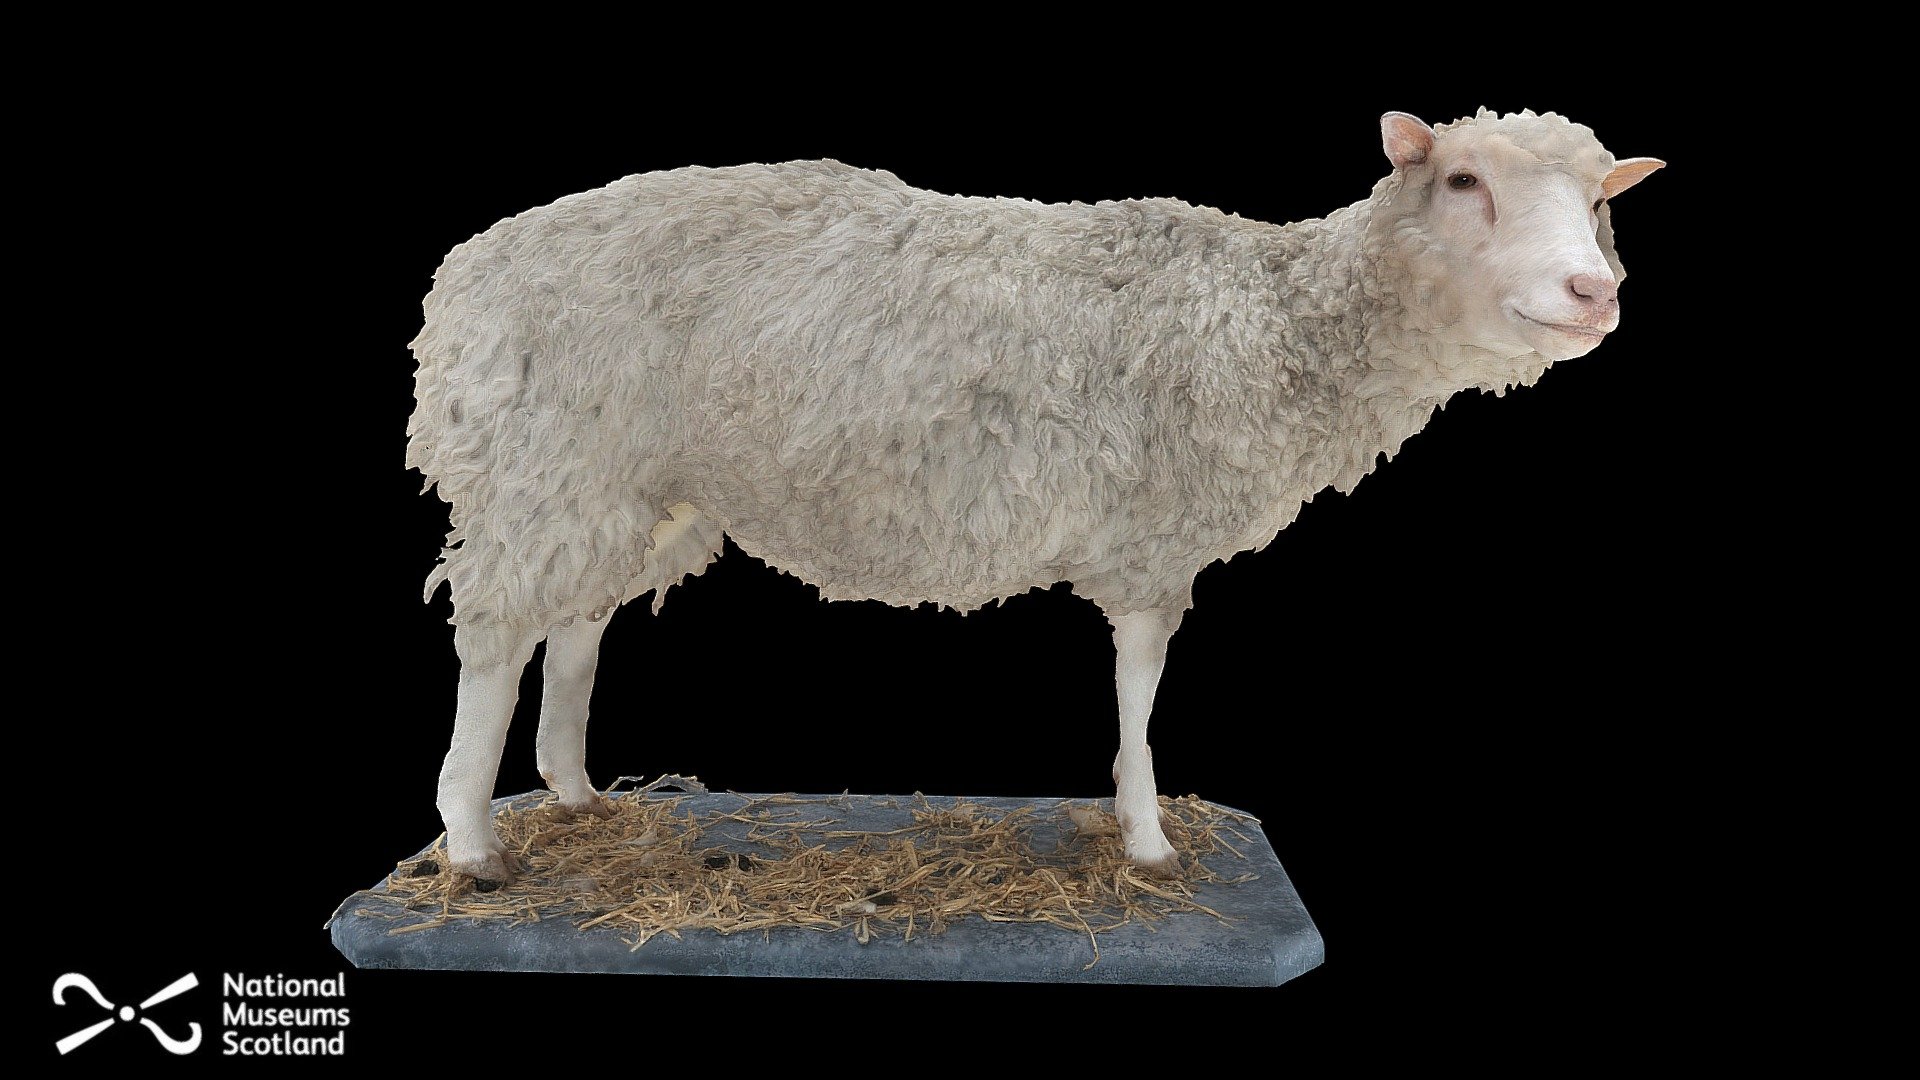 Celebrating the 25th anniversary of the birth of Dolly the Sheep, the first cloned mammal to be created from an adult cell. 

Dolly was born on 5 July 1996 at the Roslin Institute, Scotland of a Scottish Blackface surrogate mother. She died on 14 February 2003.

See Dolly on display in the Animal World gallery at the National Museum Of Scotland or find out more here: https://www.nms.ac.uk/explore-our-collections/stories/natural-sciences/dolly-the-sheep/

Museum reference Z.2003.40

Collection Mammals

Scientific name(s) species: Ovis aries Linnaeus, 1758 - Sheep

Specimen details Specimen form: Mounted skin and skeleton; Sex: Female; Phase: Adult

Associations University of Edinburgh, The Roslin Institute and R(D)SVS

Model produced by Dr Hugo Anderson-Whymark 3d model